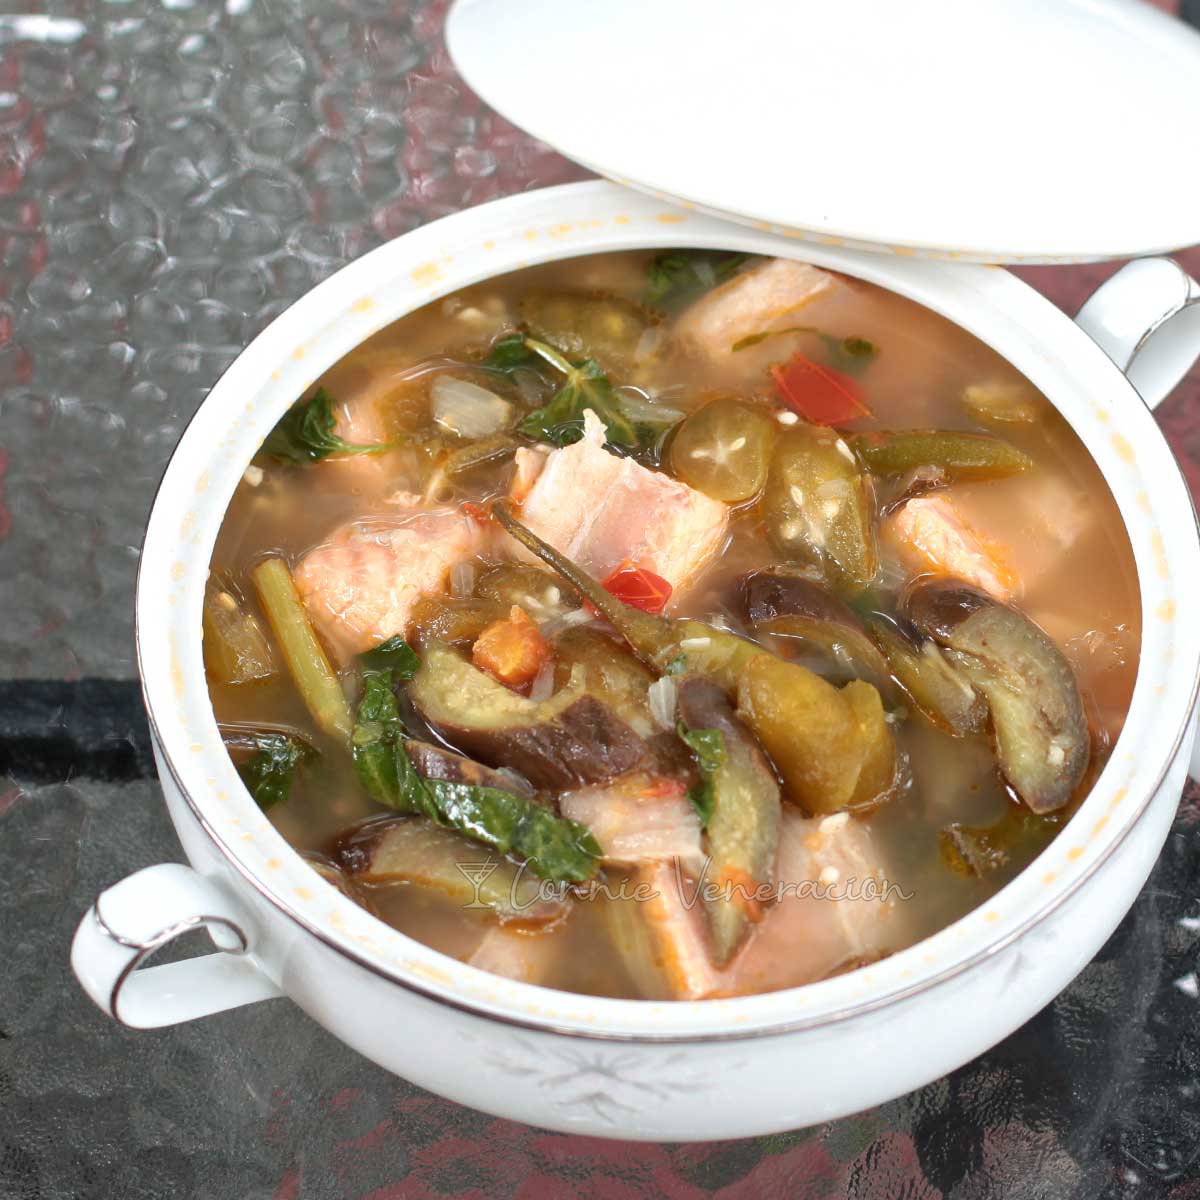 Salmon belly sinigang in tureen